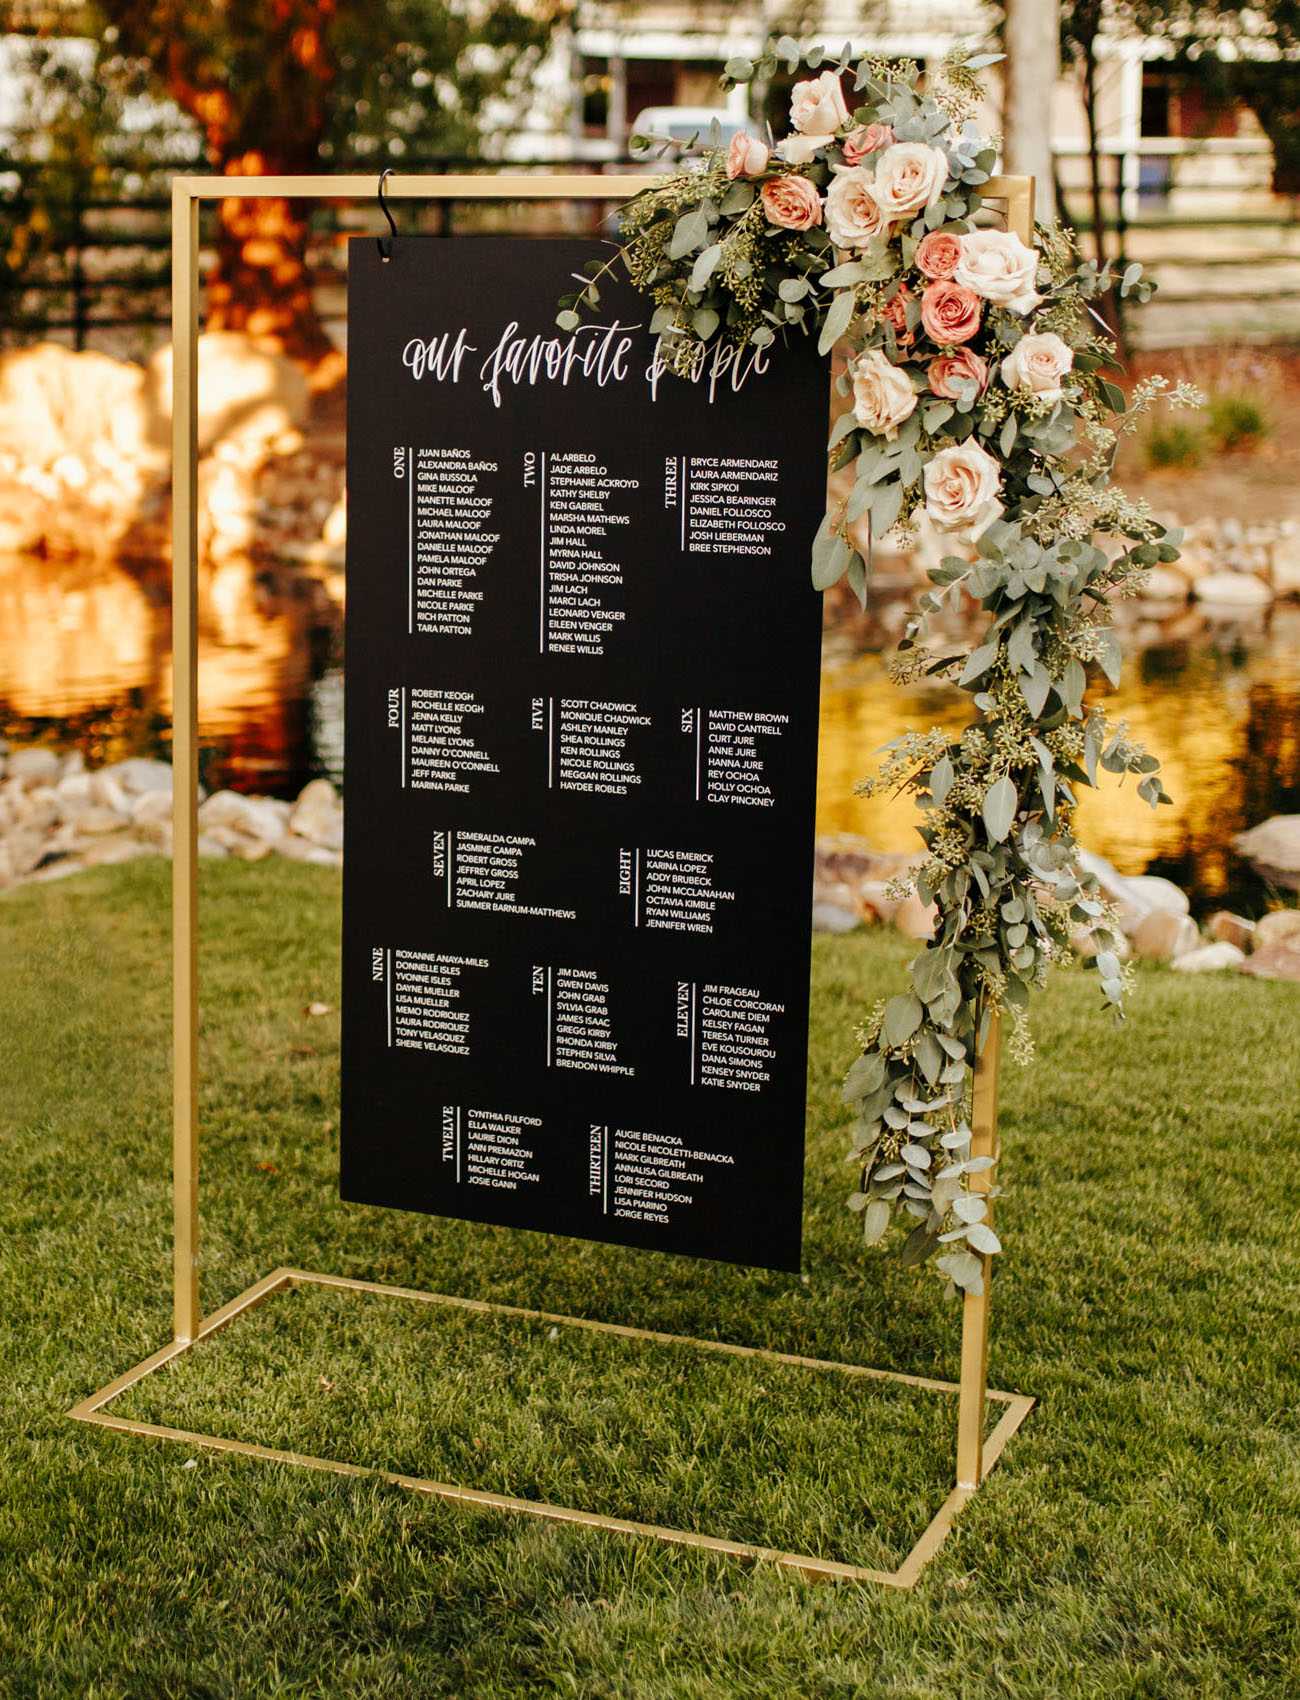 The wedding stationery was very modern, fresh and laconic and with lush blooms